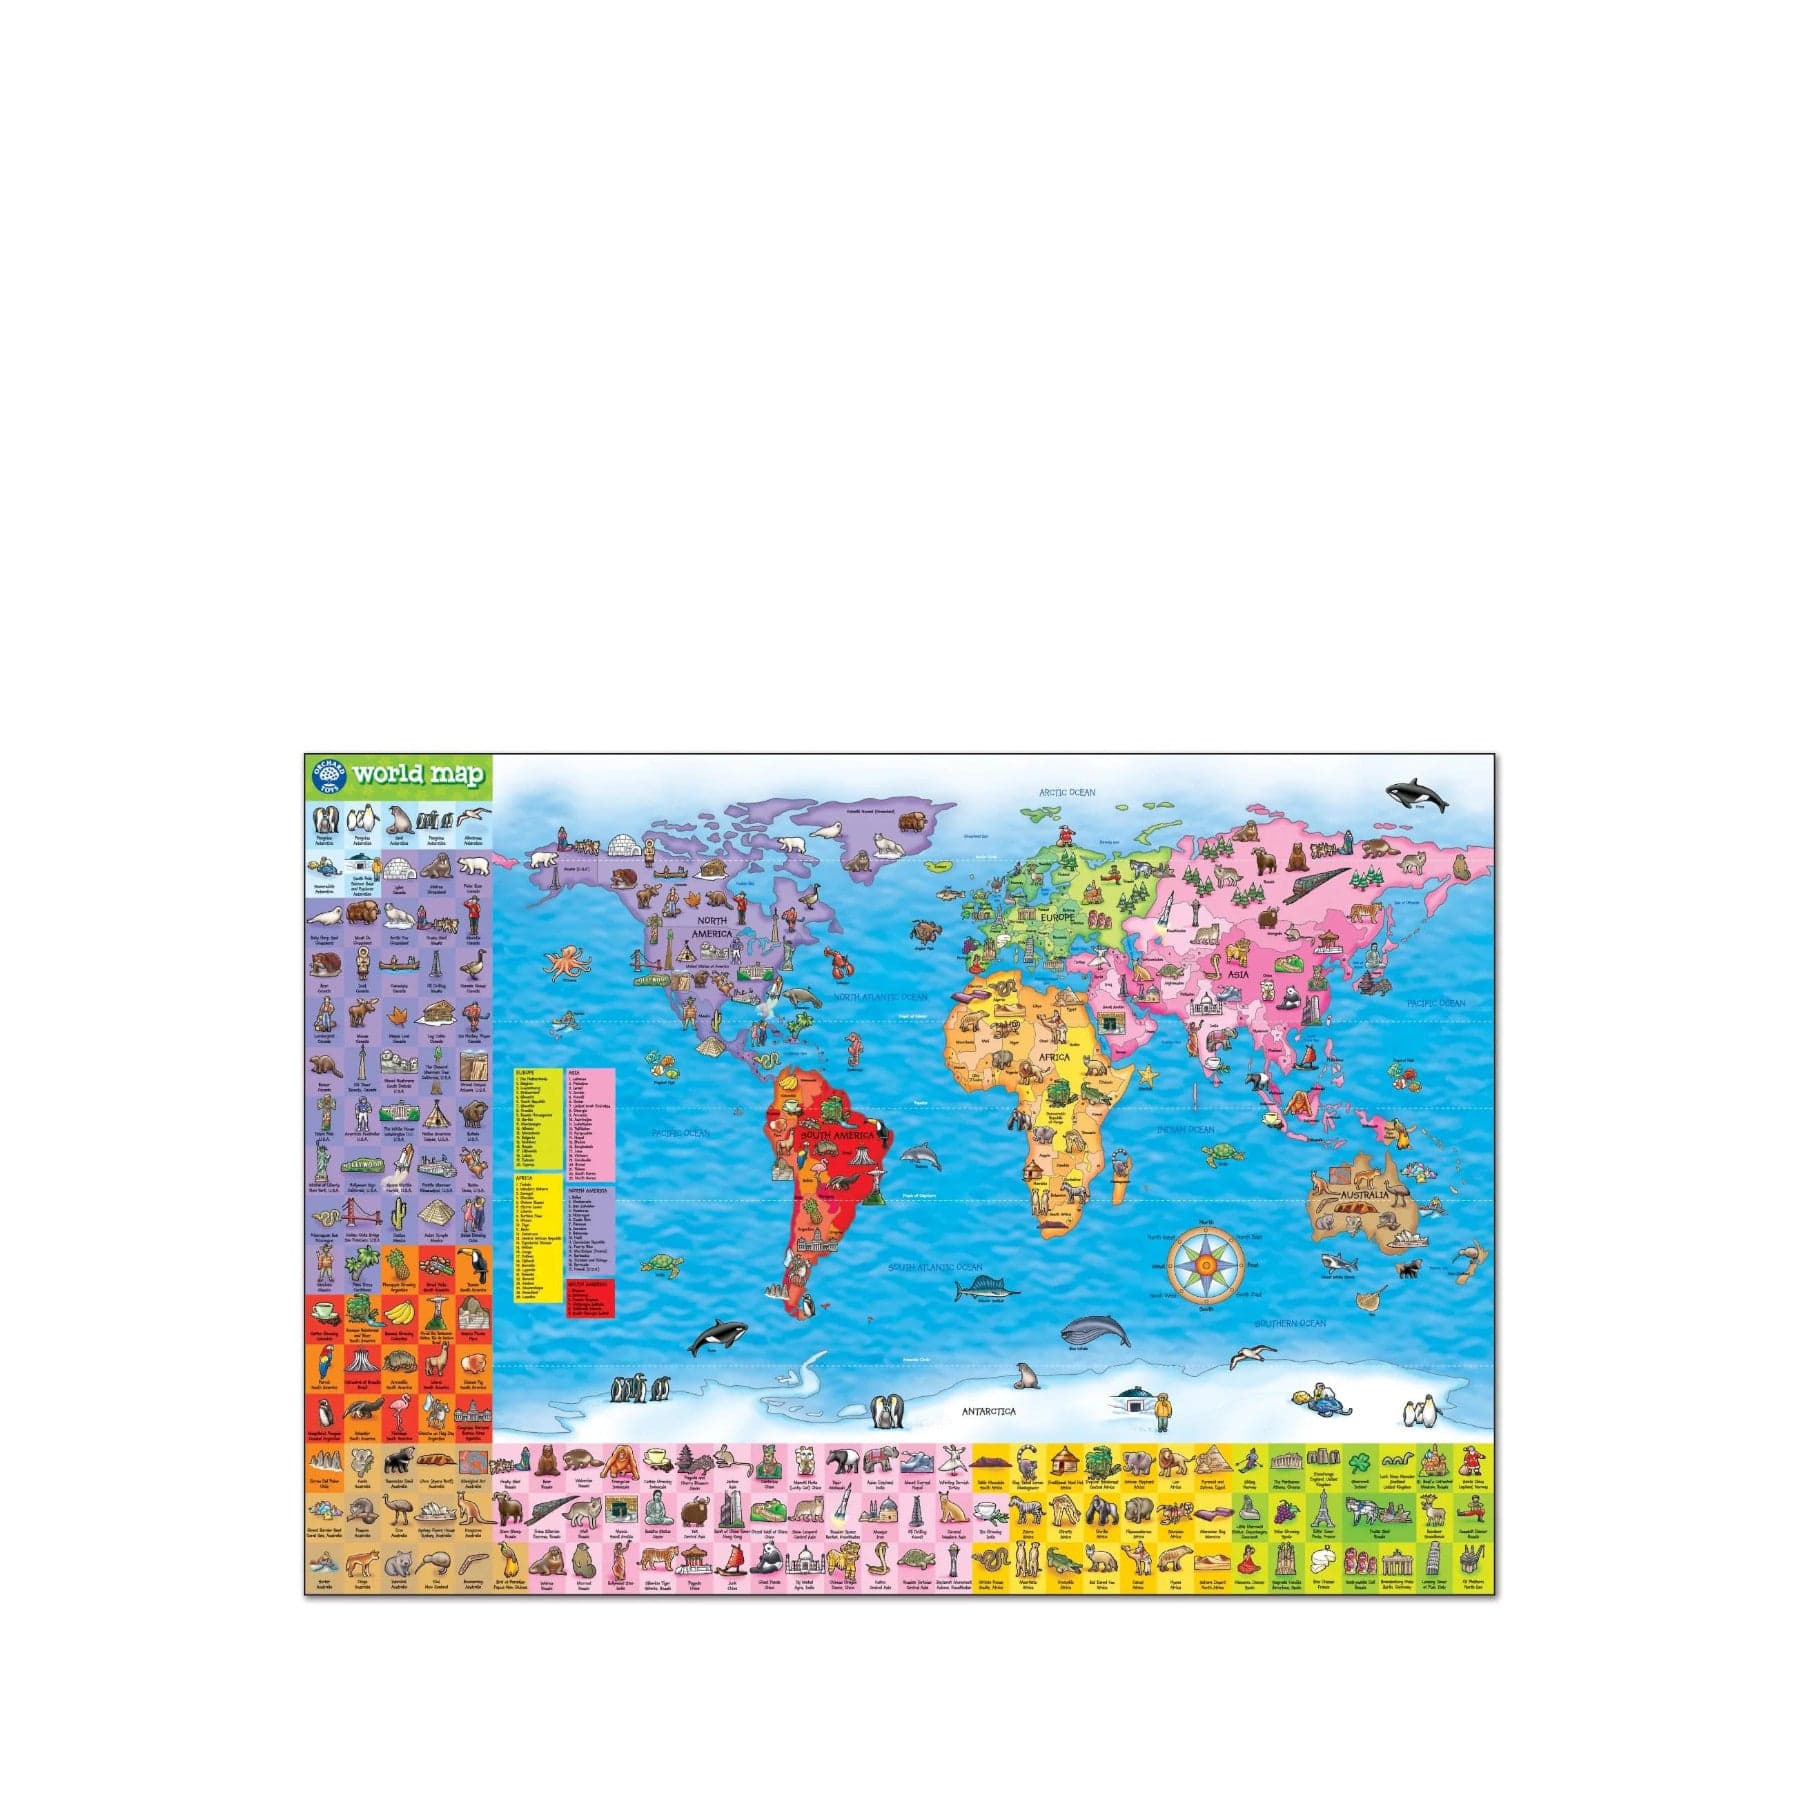 Colorful illustrated world map for children with cartoon animals, landmarks, and cultural representations from various countries, educational tool for geography learning